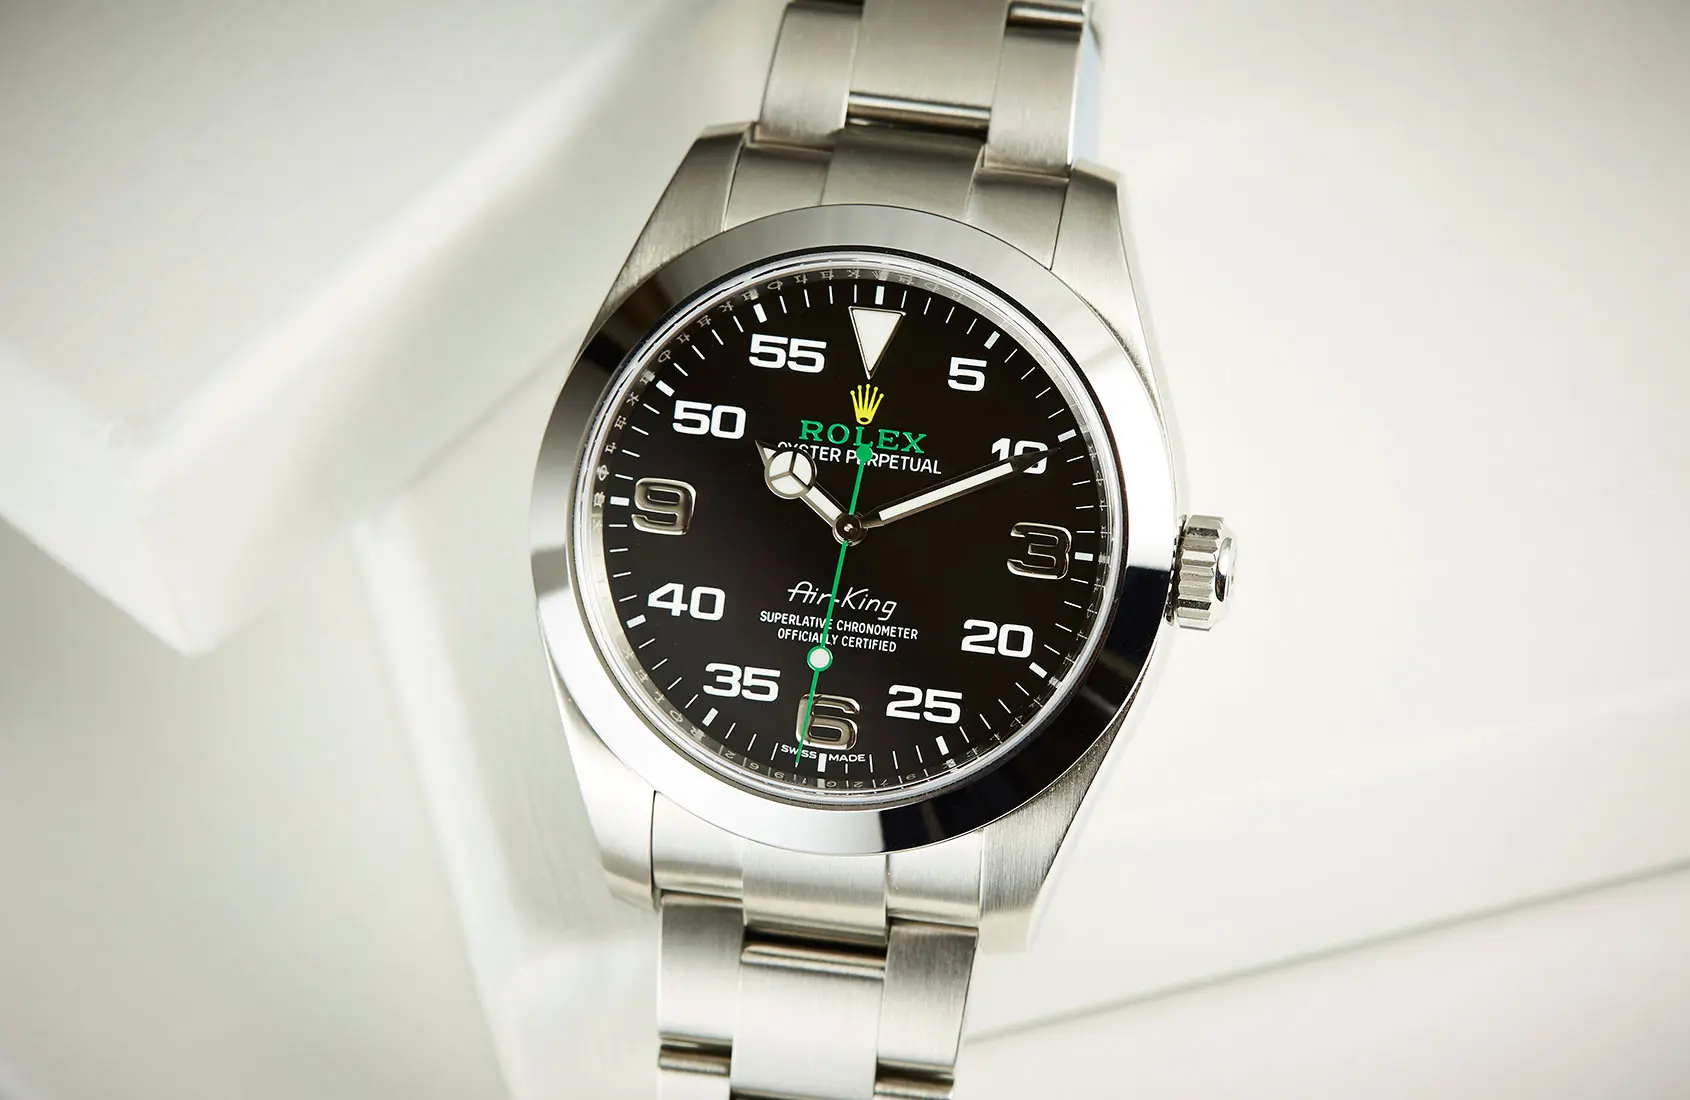 We predict the Rolex Basel using the 7 years as a guide